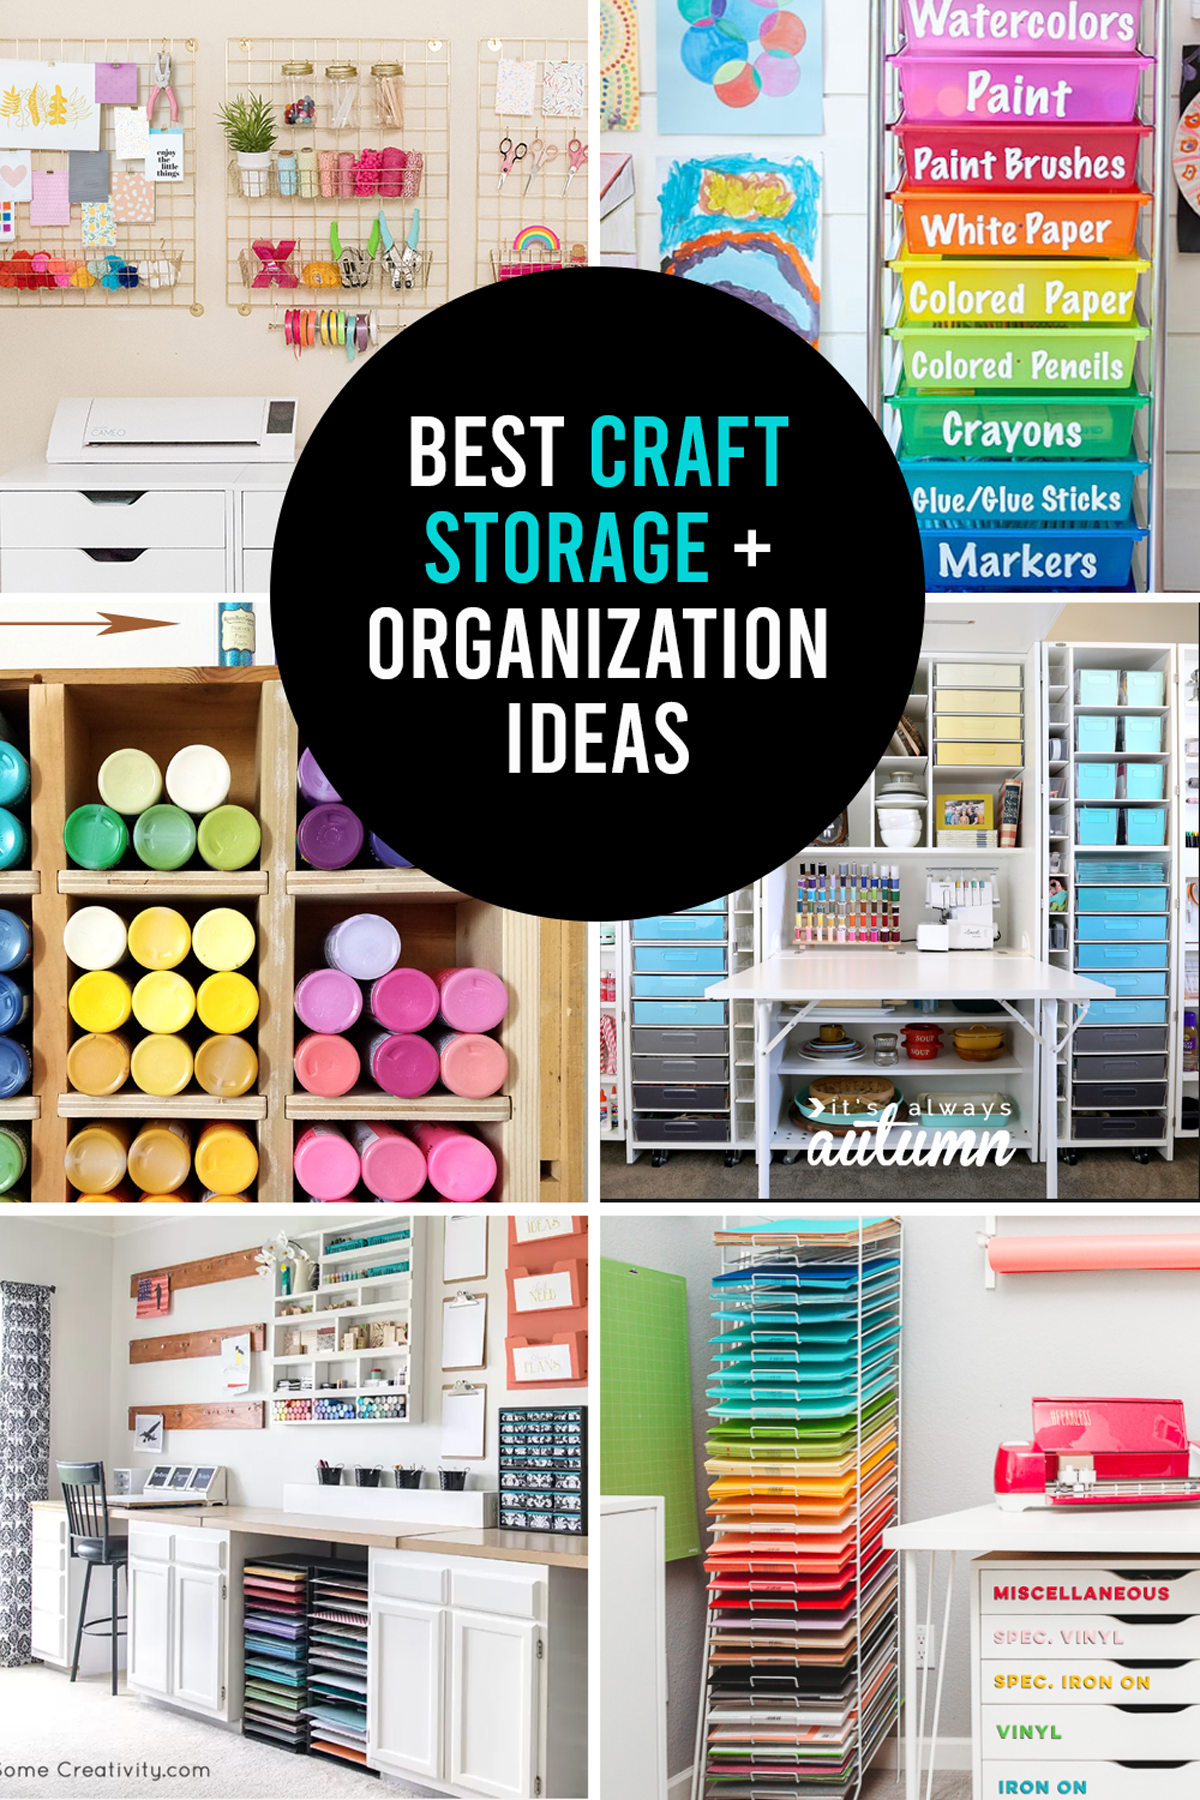 Five Tools for Organizing Scrapbooking & Paper Crafting Supplies - Best  Craft Organizer